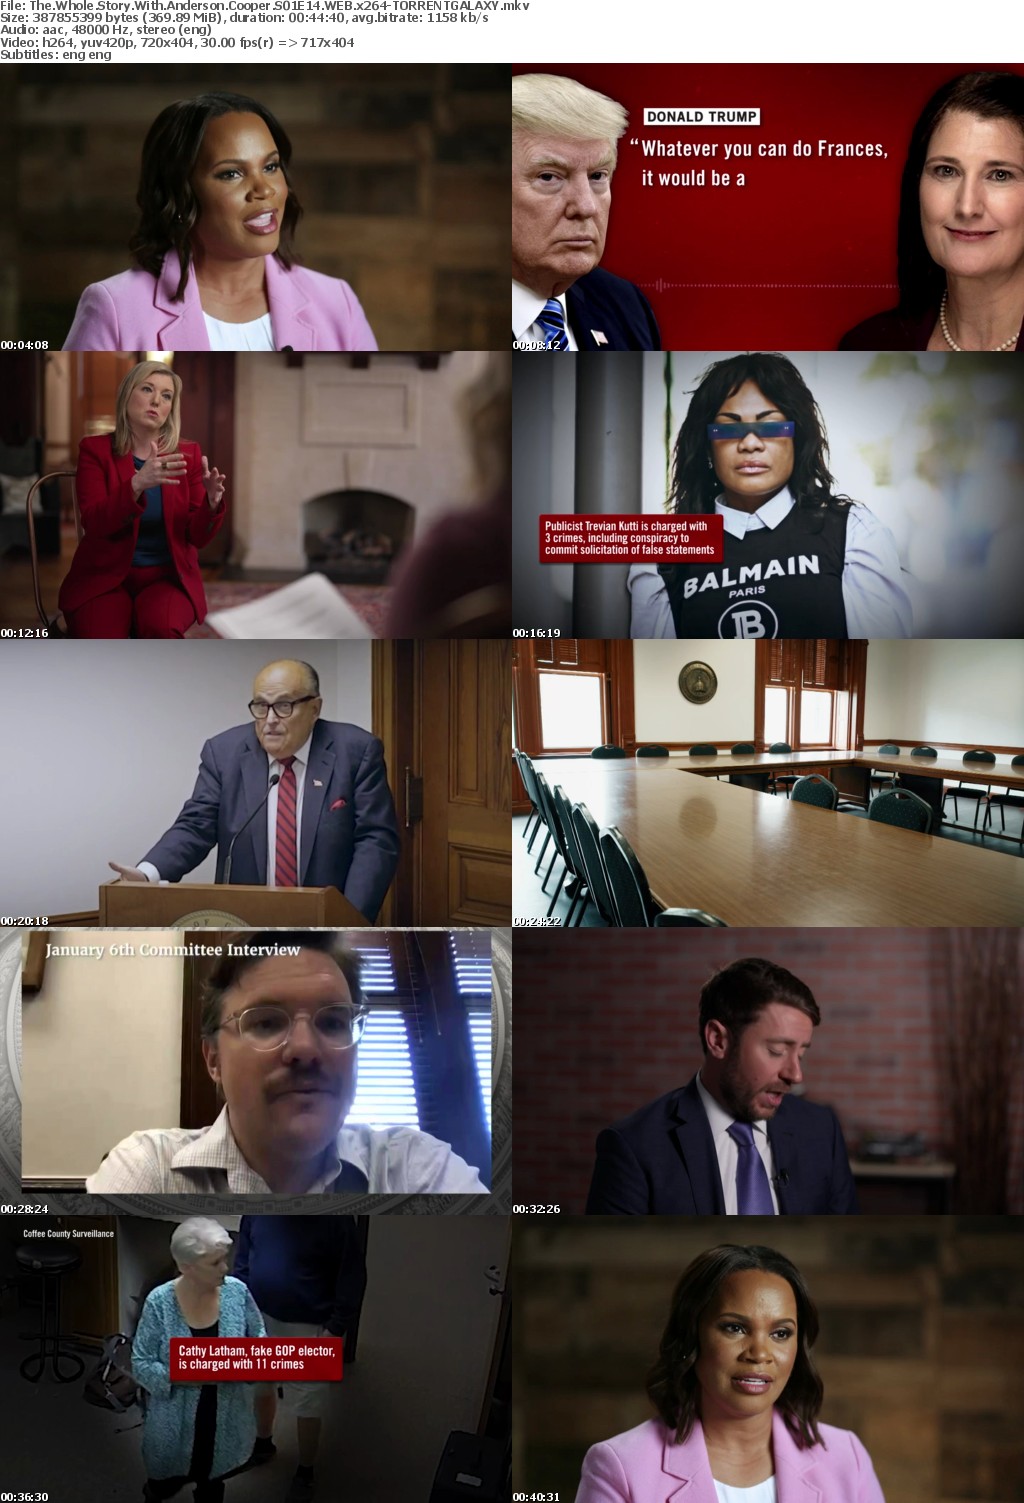 The Whole Story With Anderson Cooper S01E14 WEB x264-GALAXY